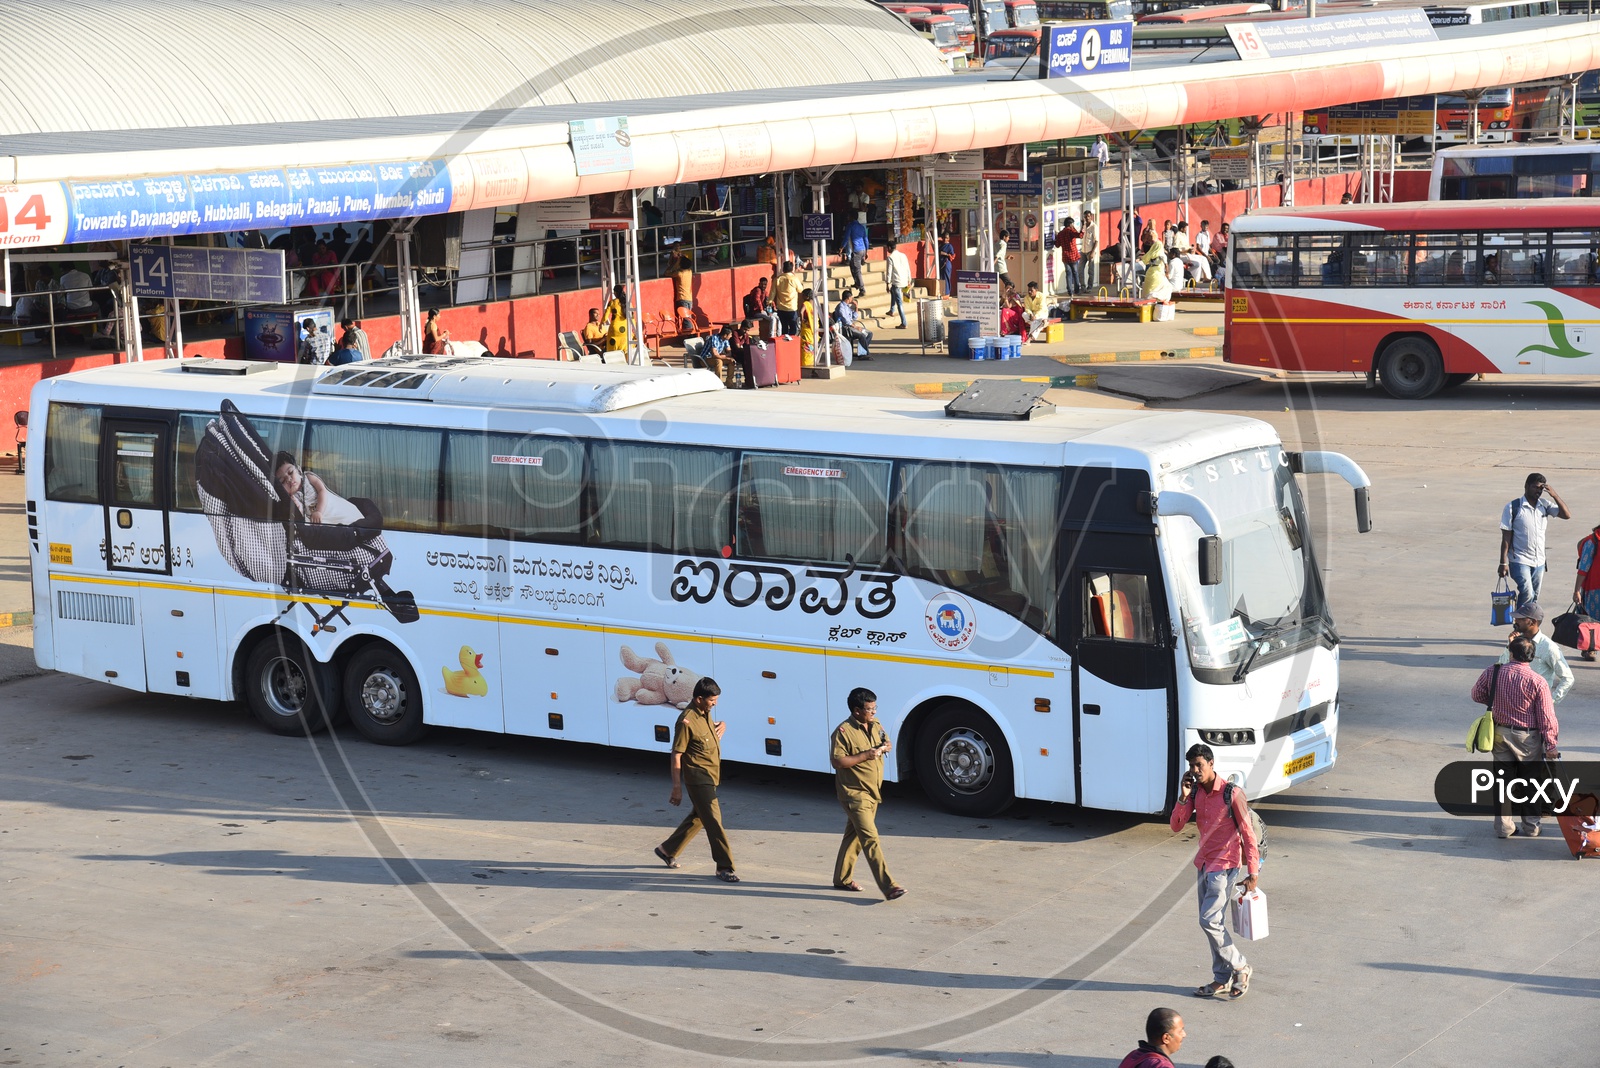 Airavat club class bus at bus terminal 1 in Majestic bus station, Bangalore